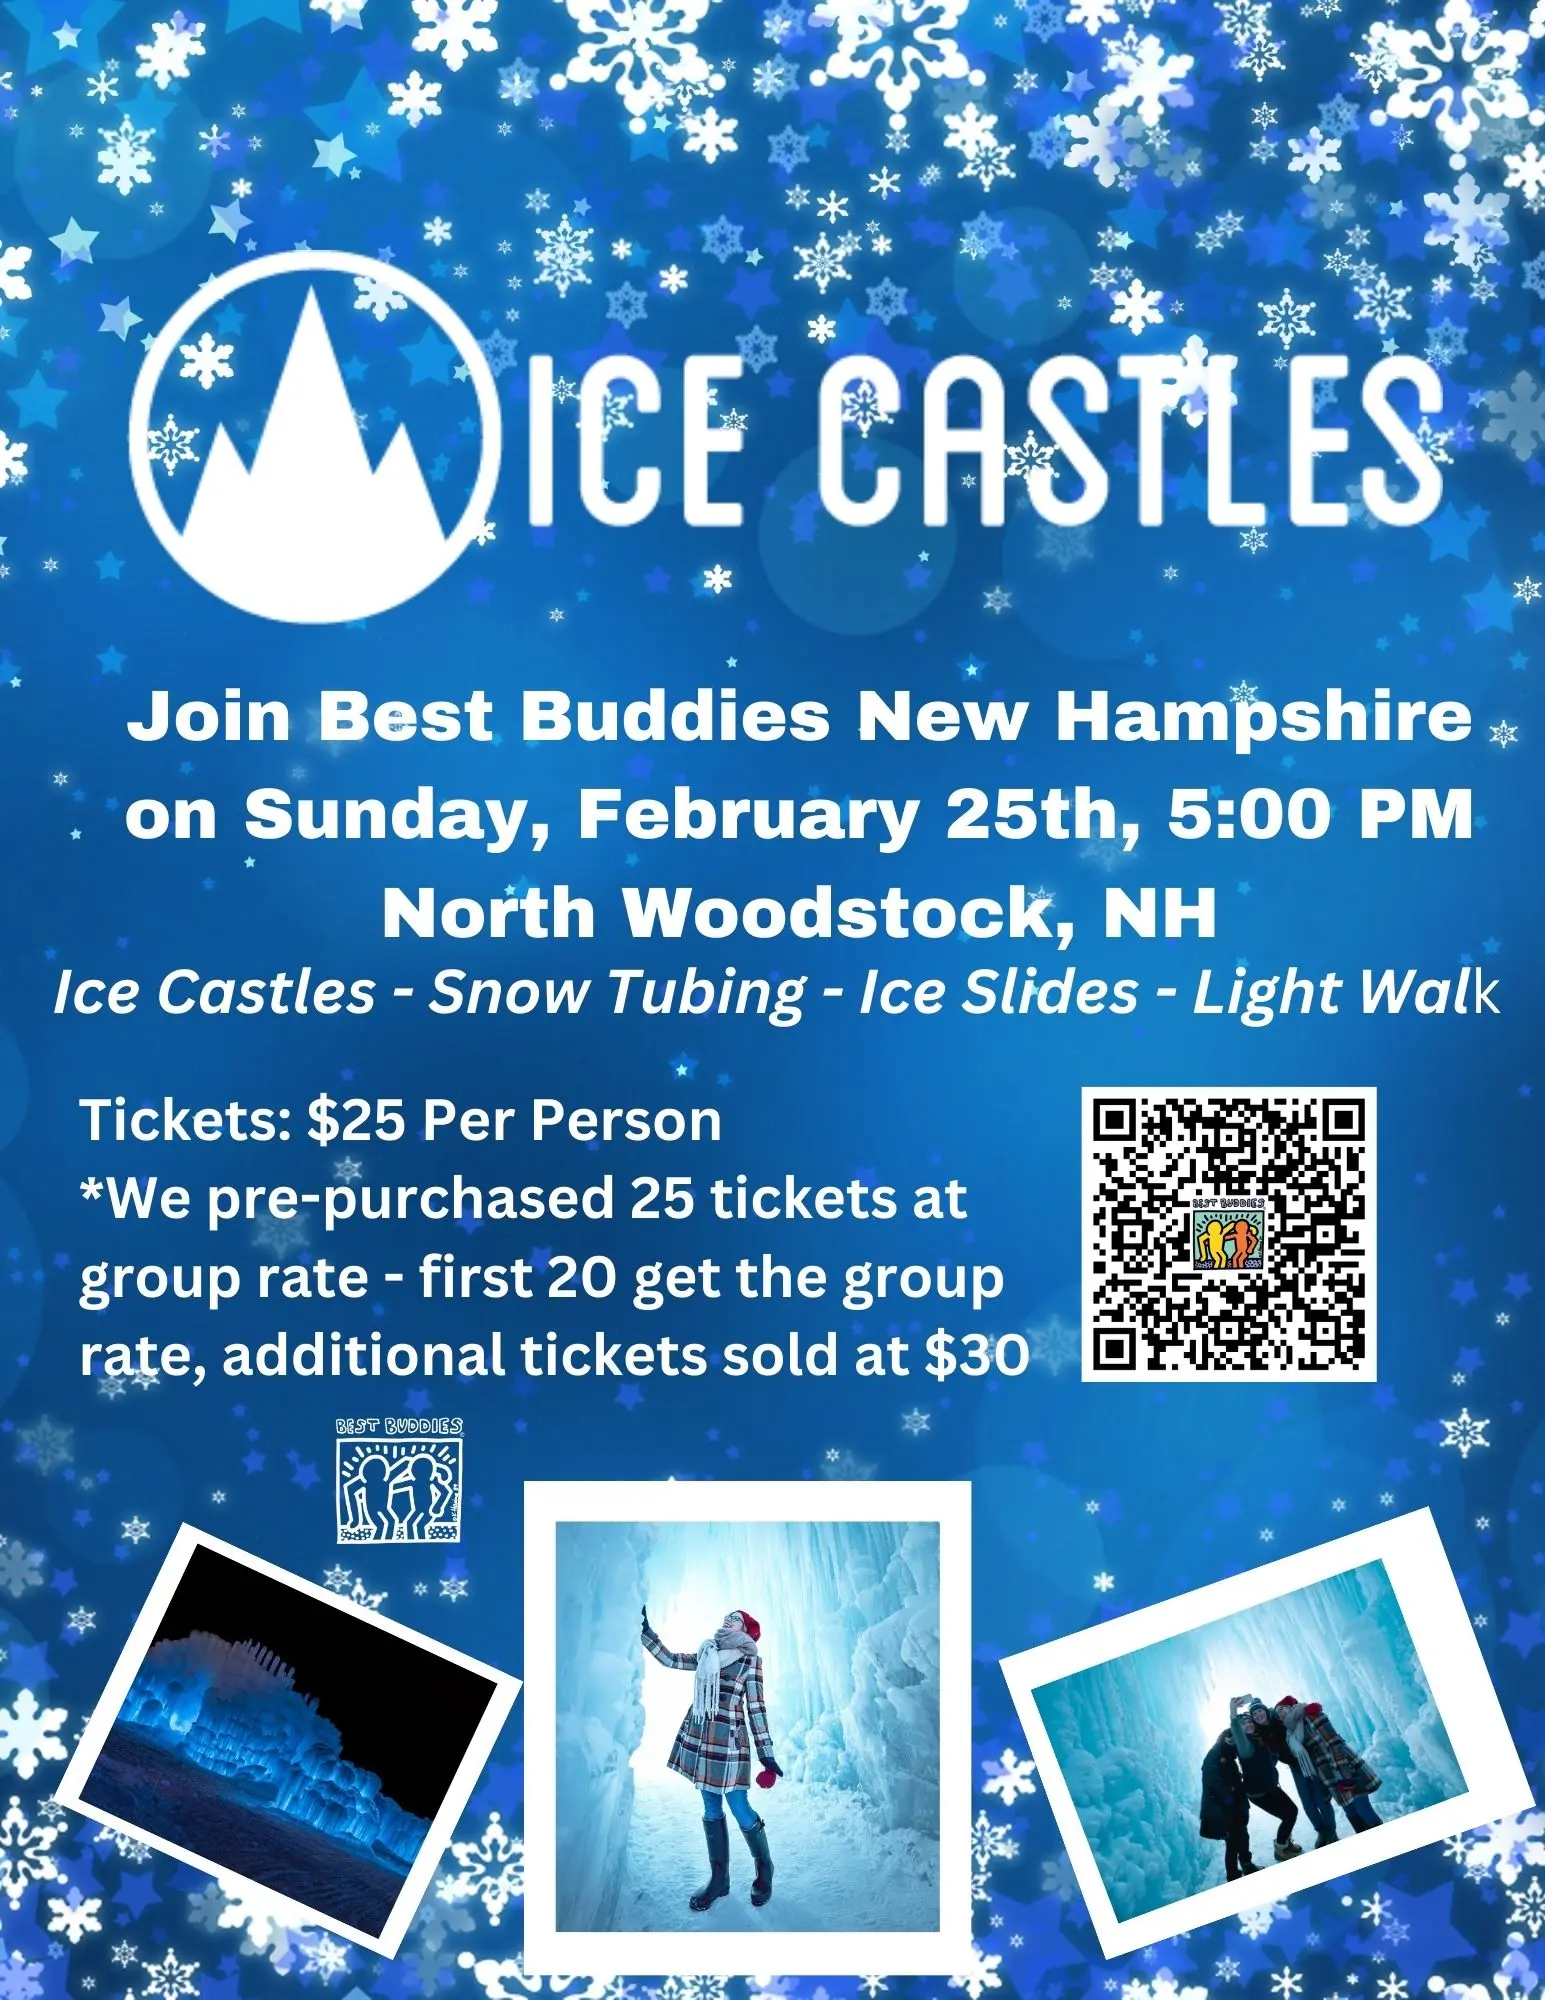 Ice castles event flyer